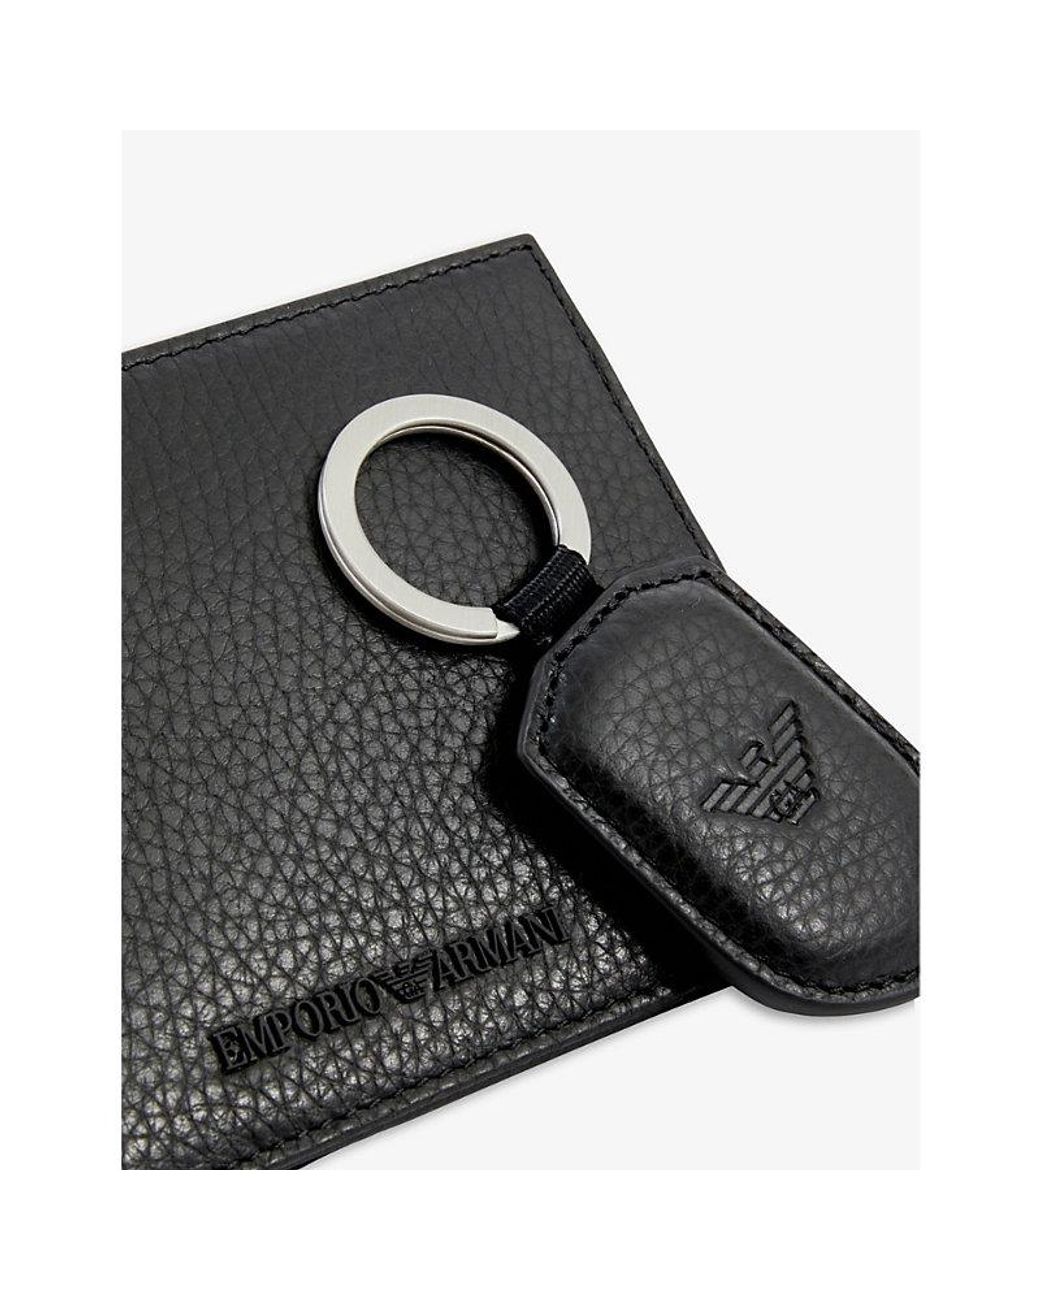 Emporio Armani Wallet And Leather Keychain Gift Set in Black for Men | Lyst